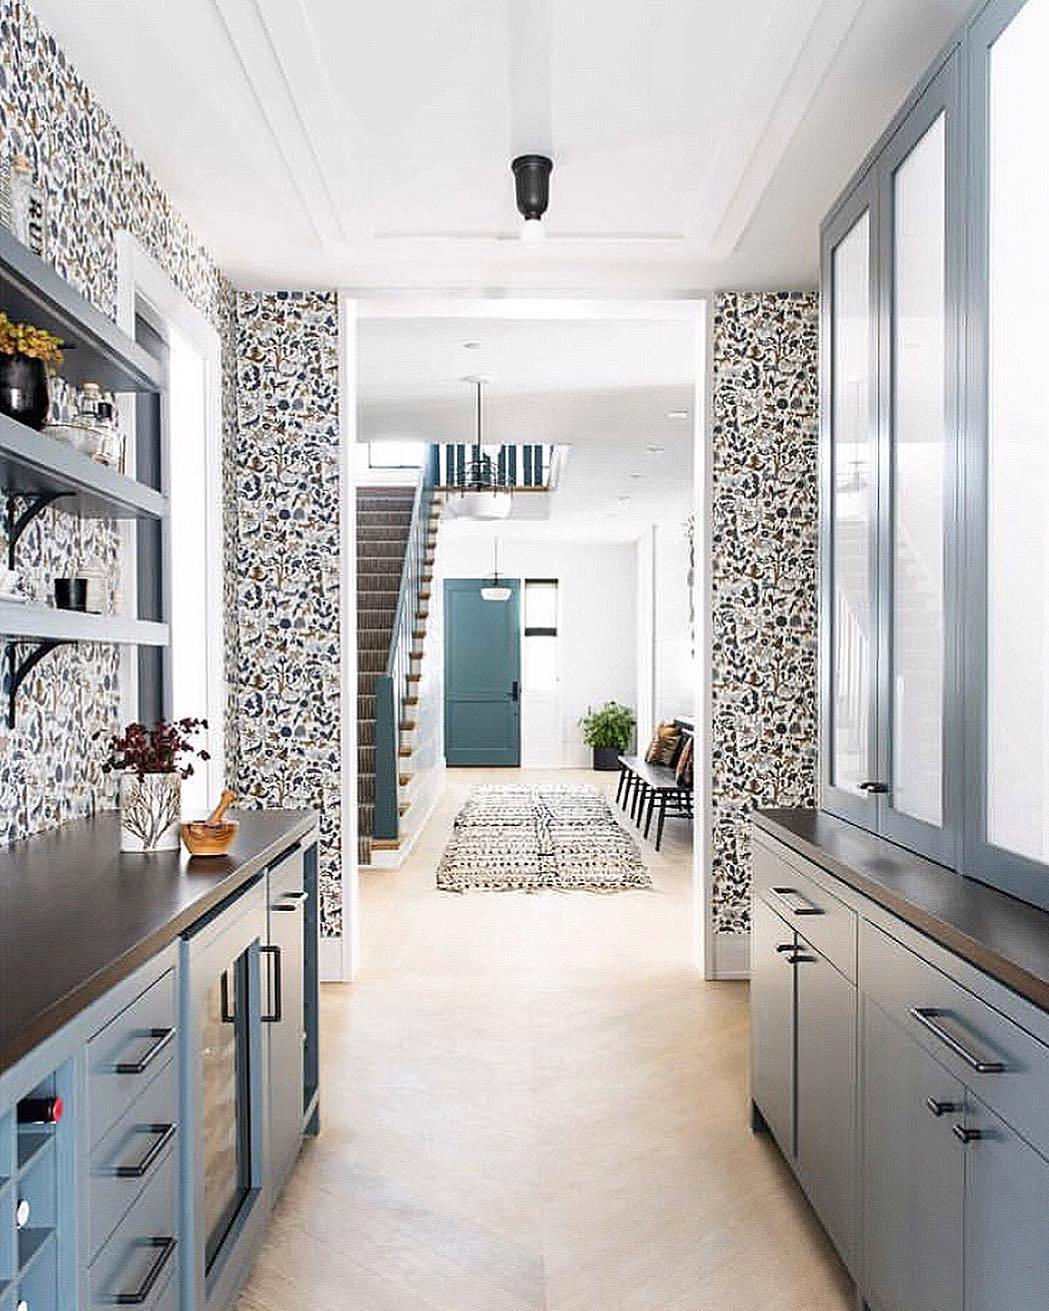 Our Favorite Patterns for the Kitchen | Foret Charcoal wallpaper | Julia Rothman | Hygge & West